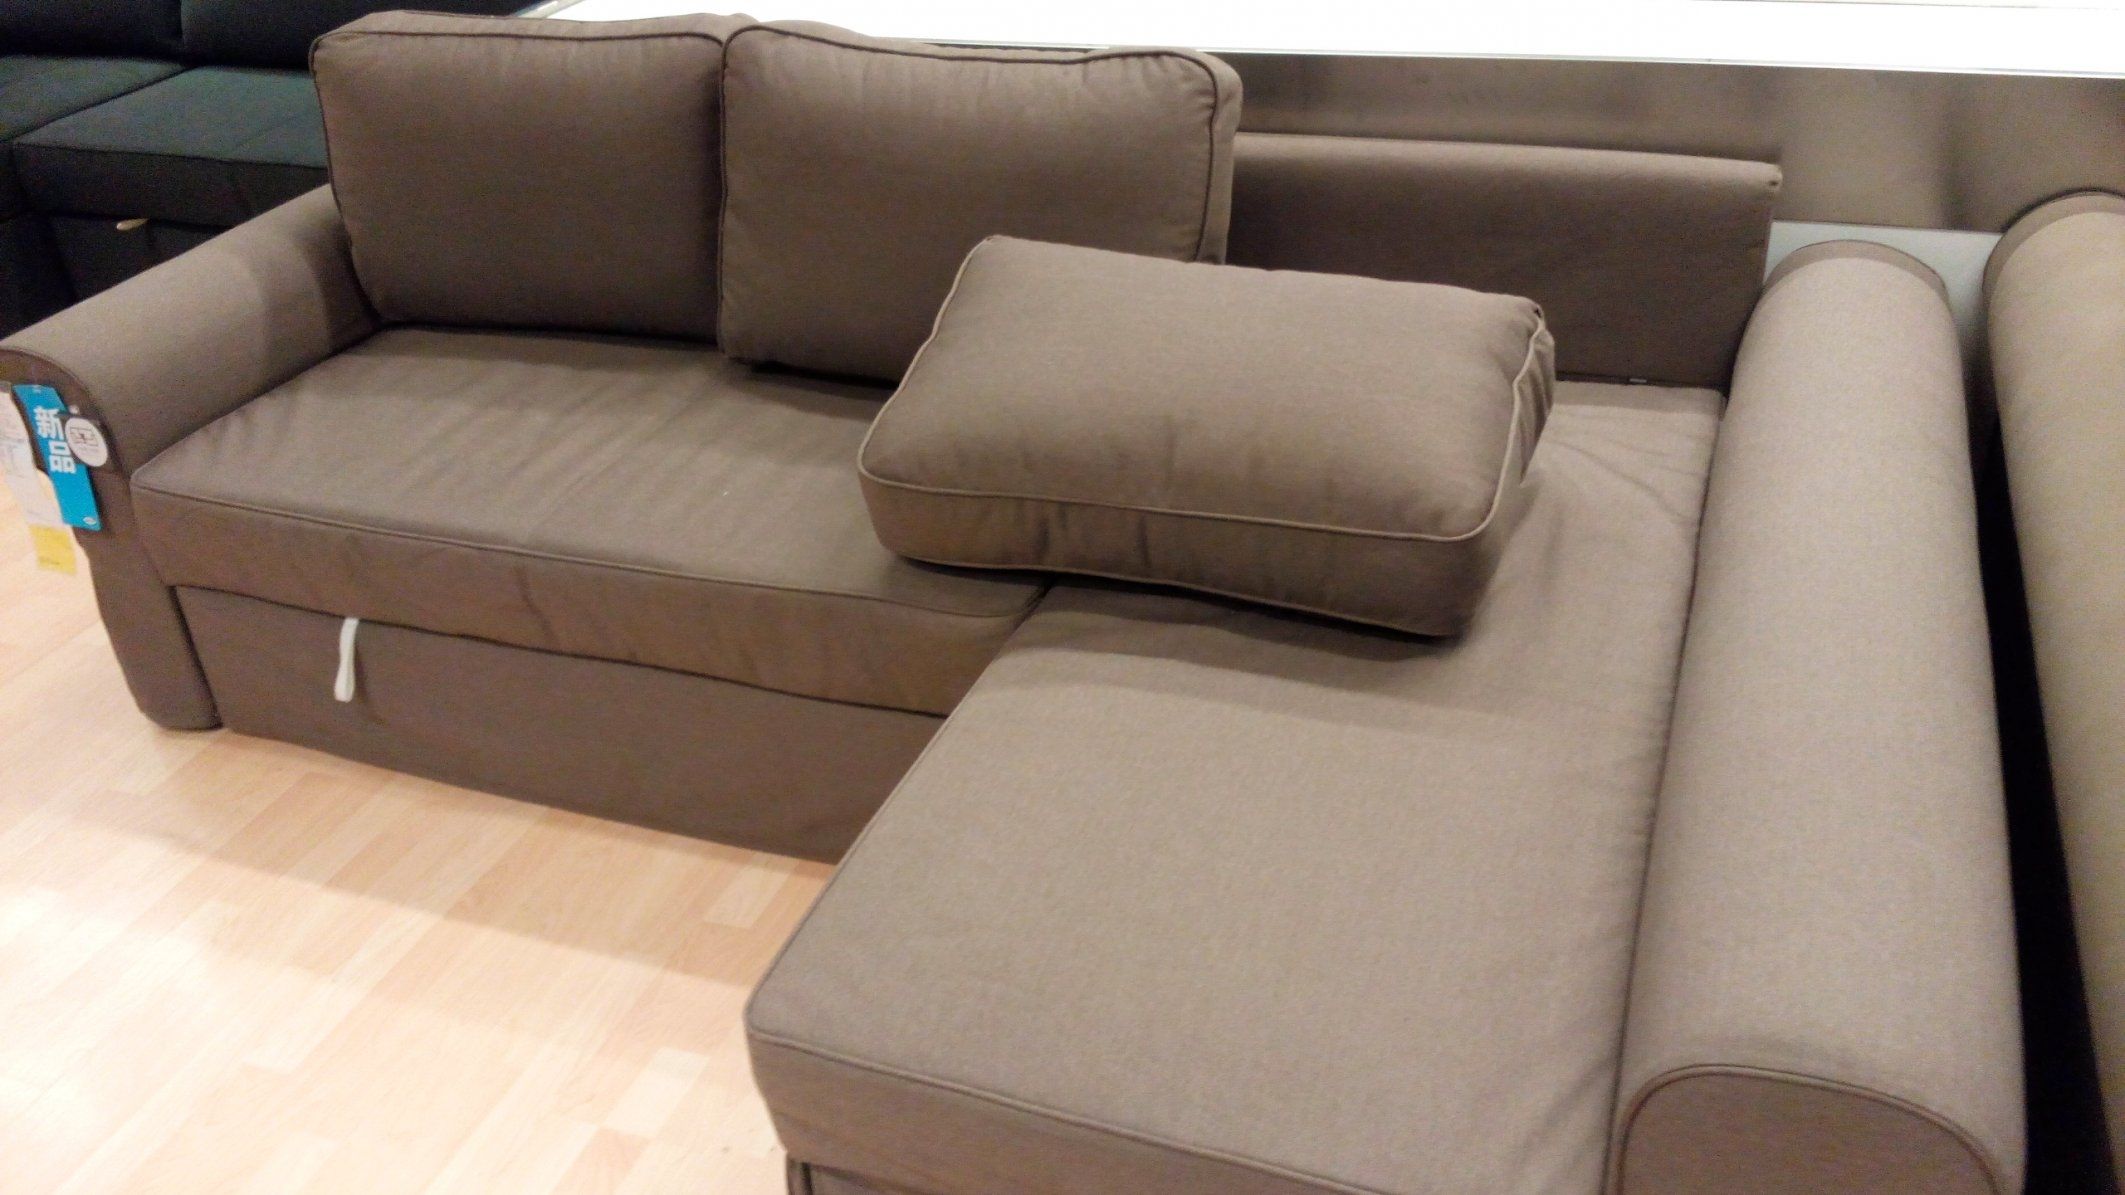 Manstad Sofa Bed Dimensions #2 Ikea Backabro Sofa Bed With Chaise In Manstad Sofas (View 5 of 10)